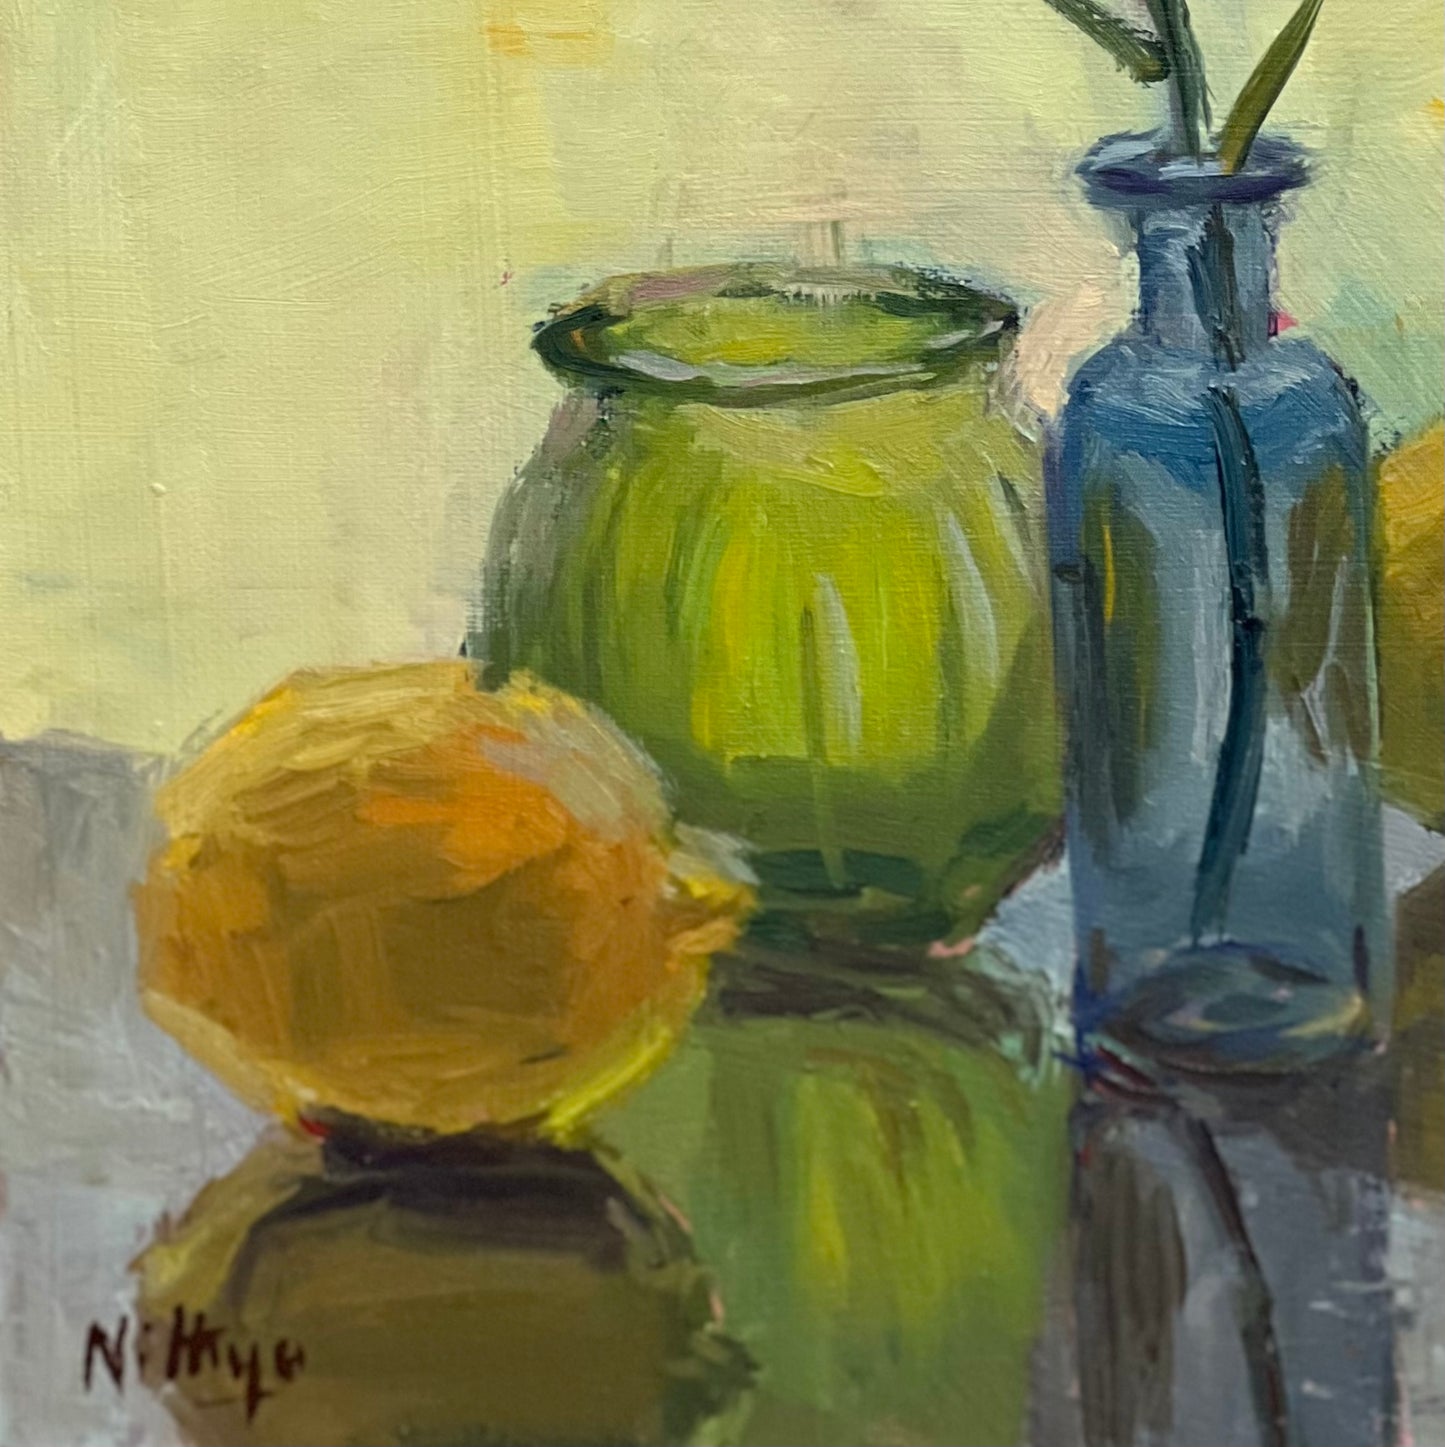 Red bottle and lemons by the window - still life oil painting